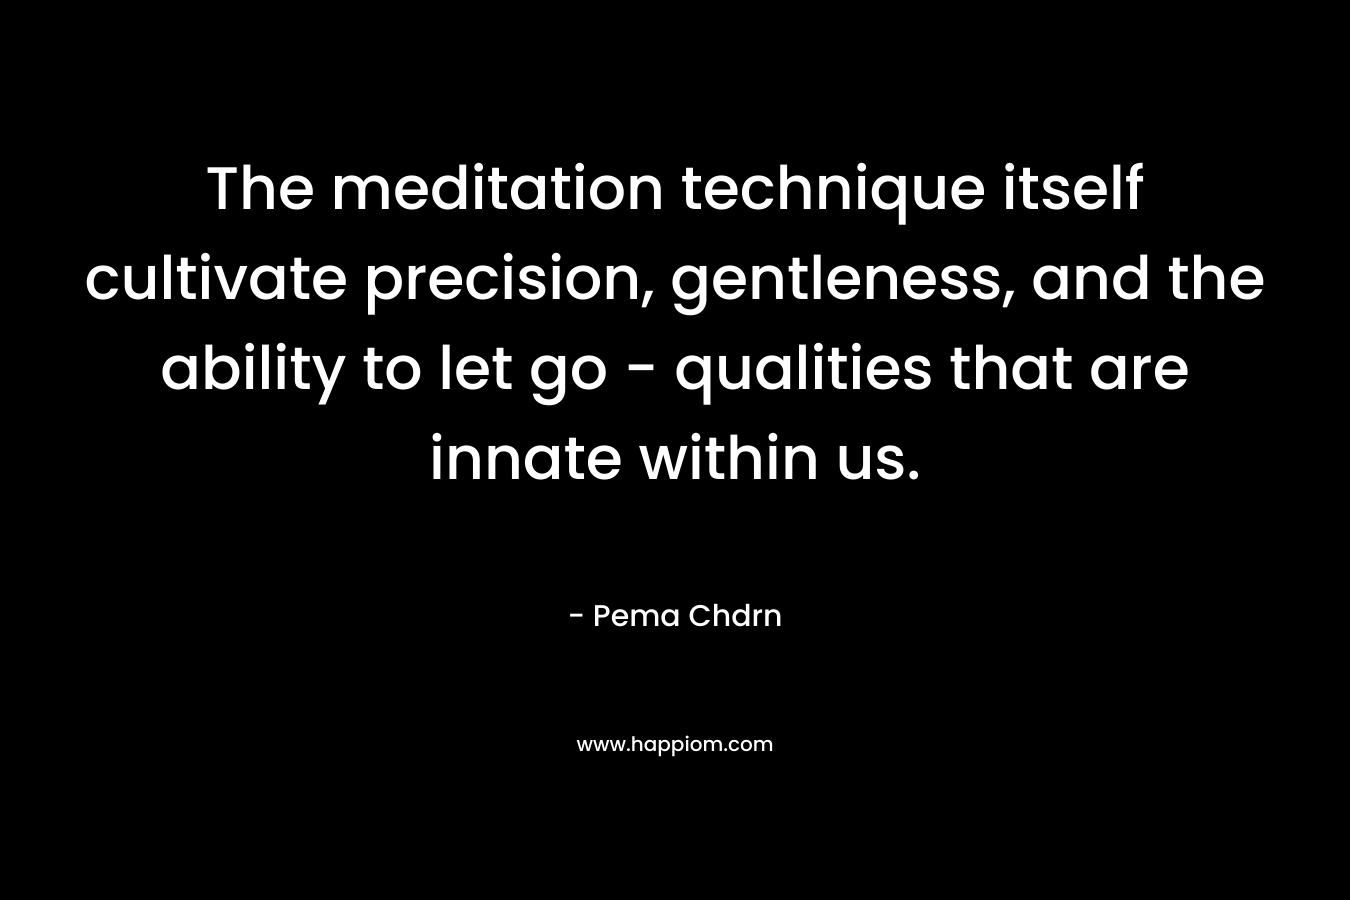 The meditation technique itself cultivate precision, gentleness, and the ability to let go – qualities that are innate within us. – Pema Chdrn